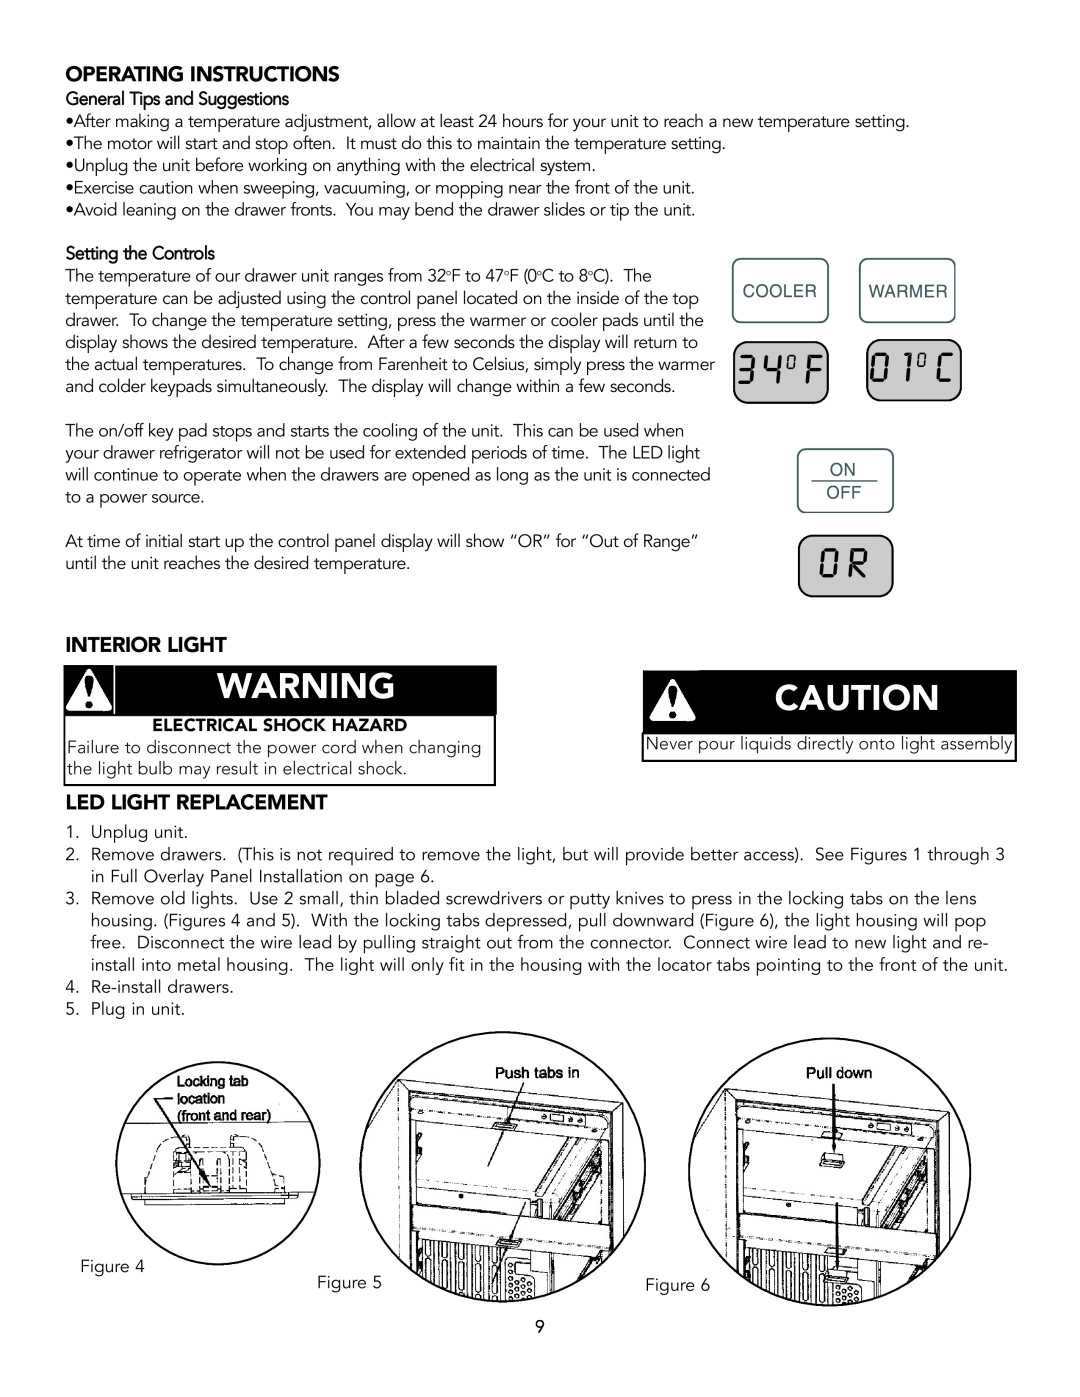 Viking Refrigerator Drawer manual Operating Instructions, Interior Light, Led Light Replacement, 34oF 01oC OR 